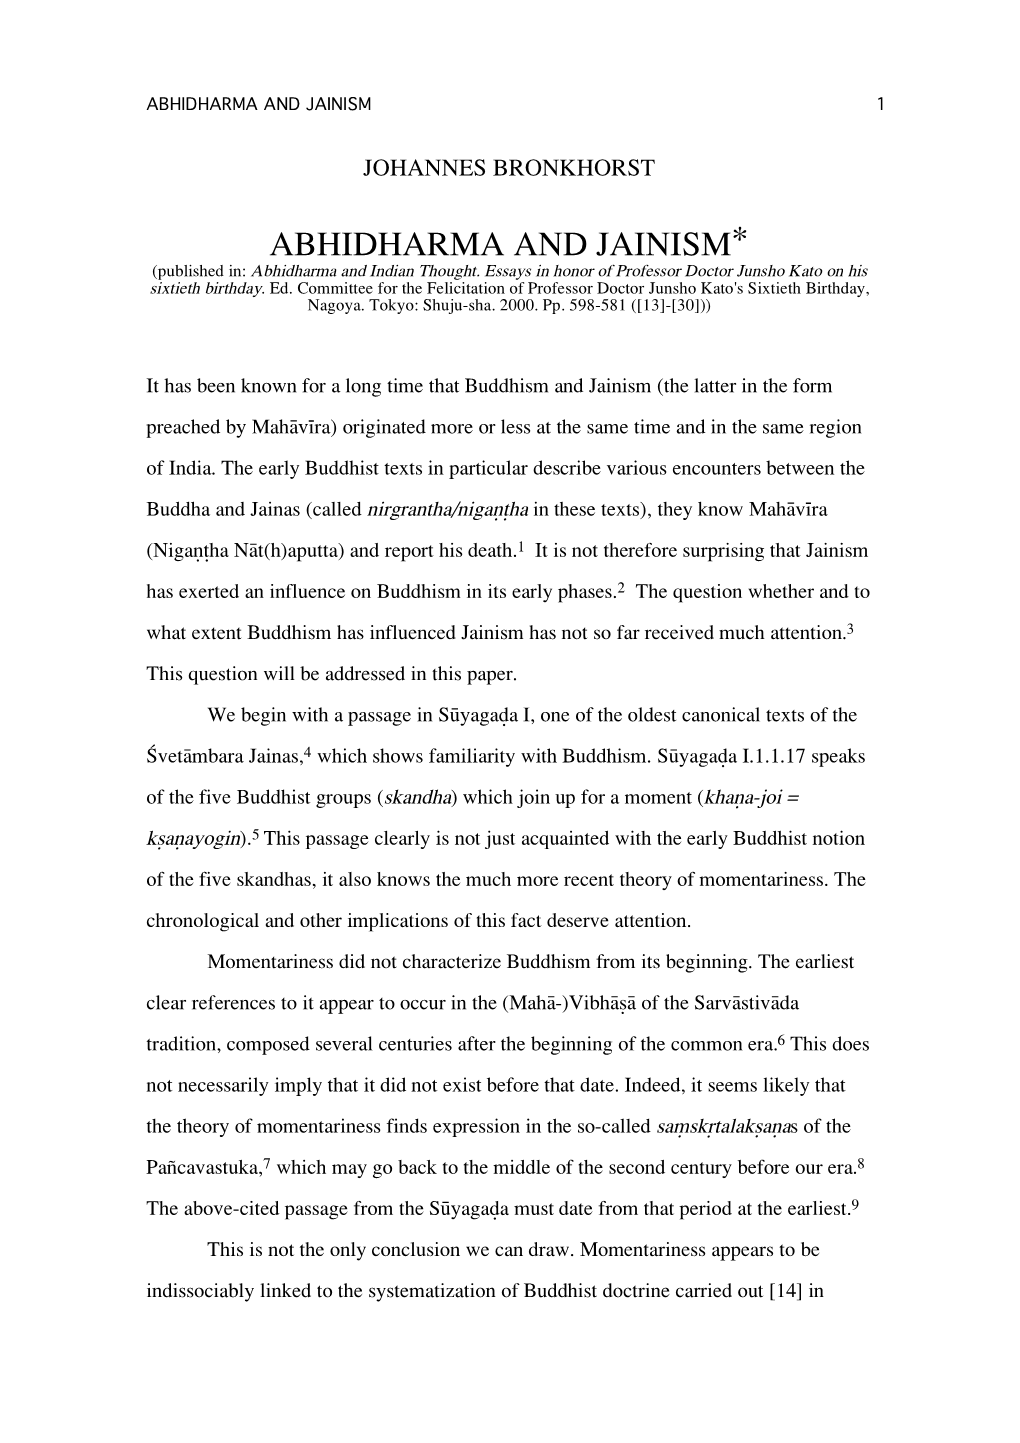 ABHIDHARMA and JAINISM* (Published In: Abhidharma and Indian Thought